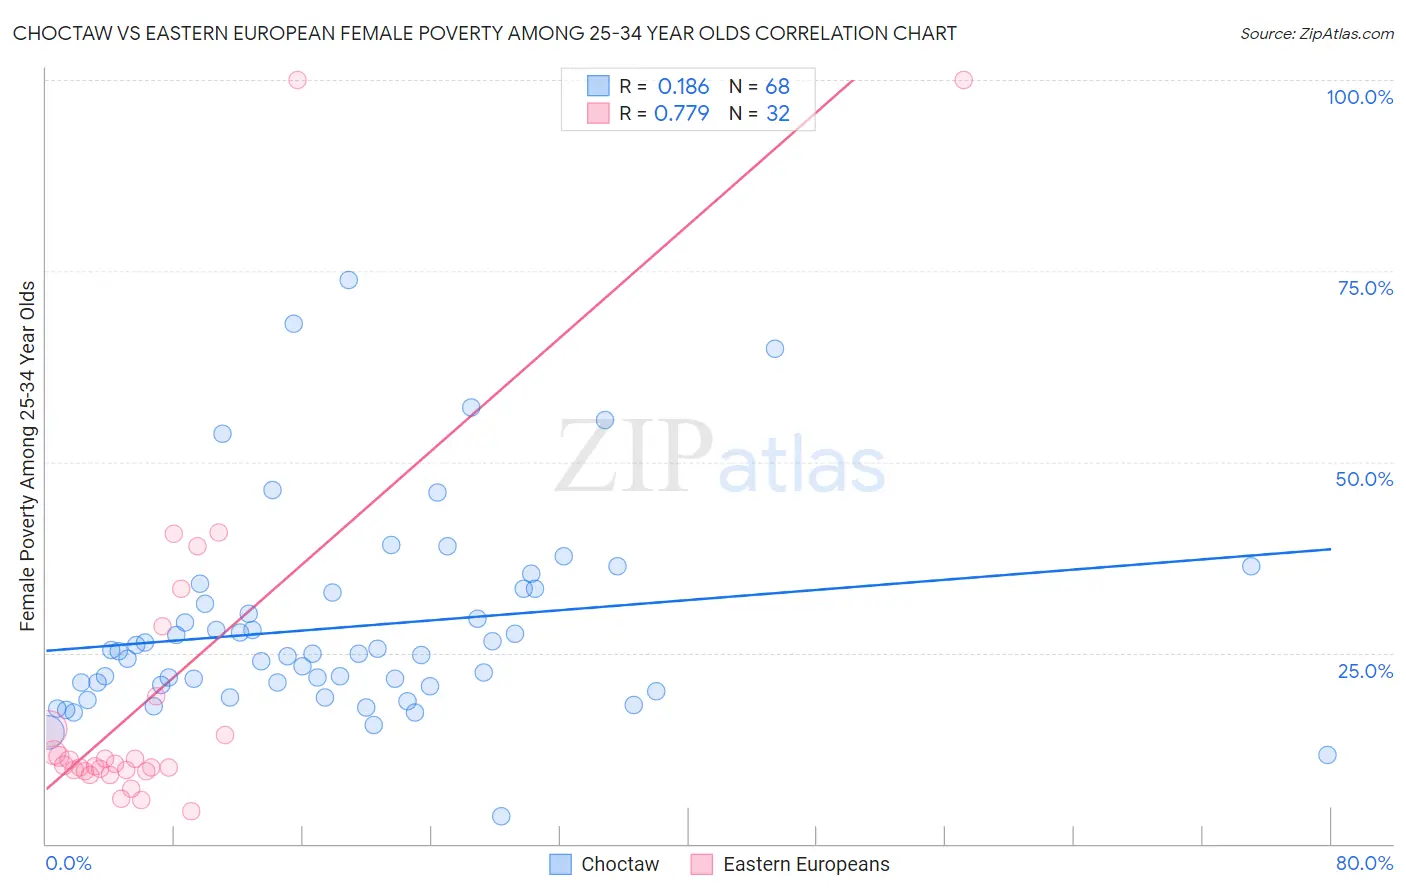 Choctaw vs Eastern European Female Poverty Among 25-34 Year Olds